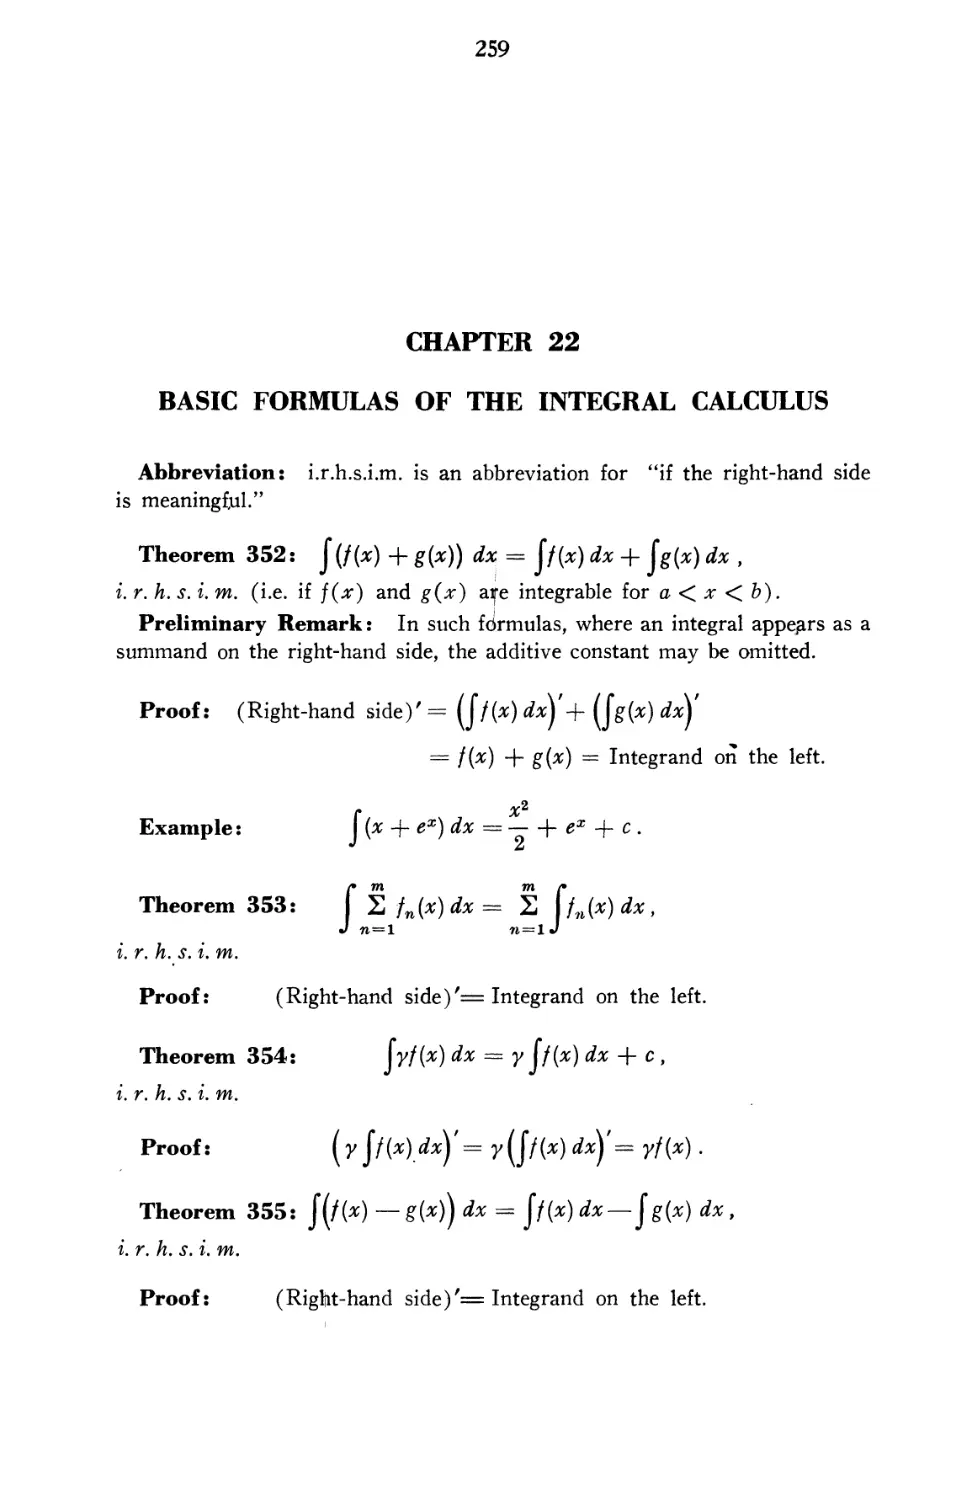 Chapter 22 Basic Formulas of the Integral Calculus